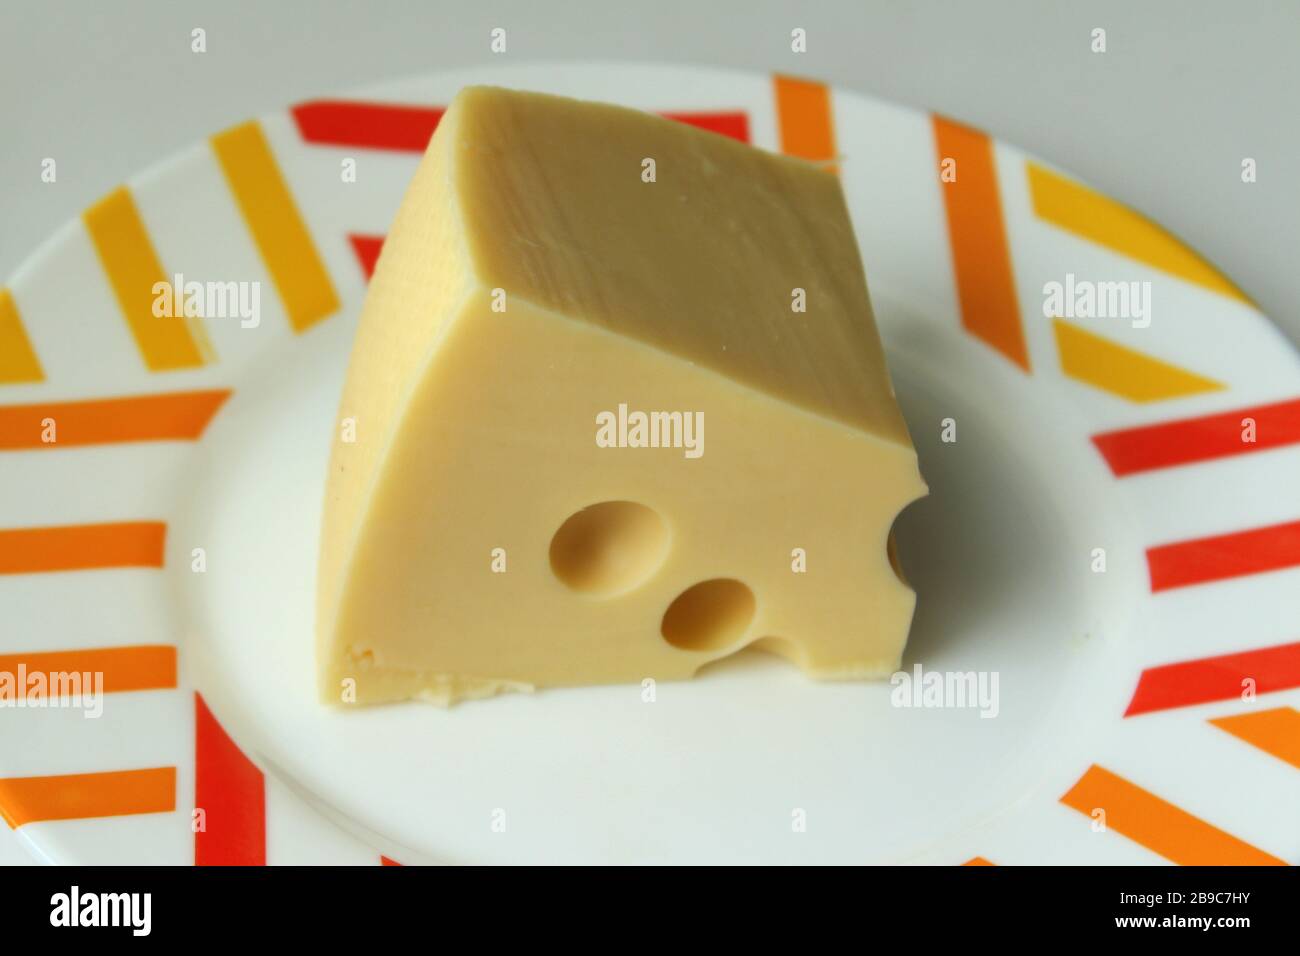 A piece of yellow cheese with holes lies on a white plate with a colored edge. Stock Photo